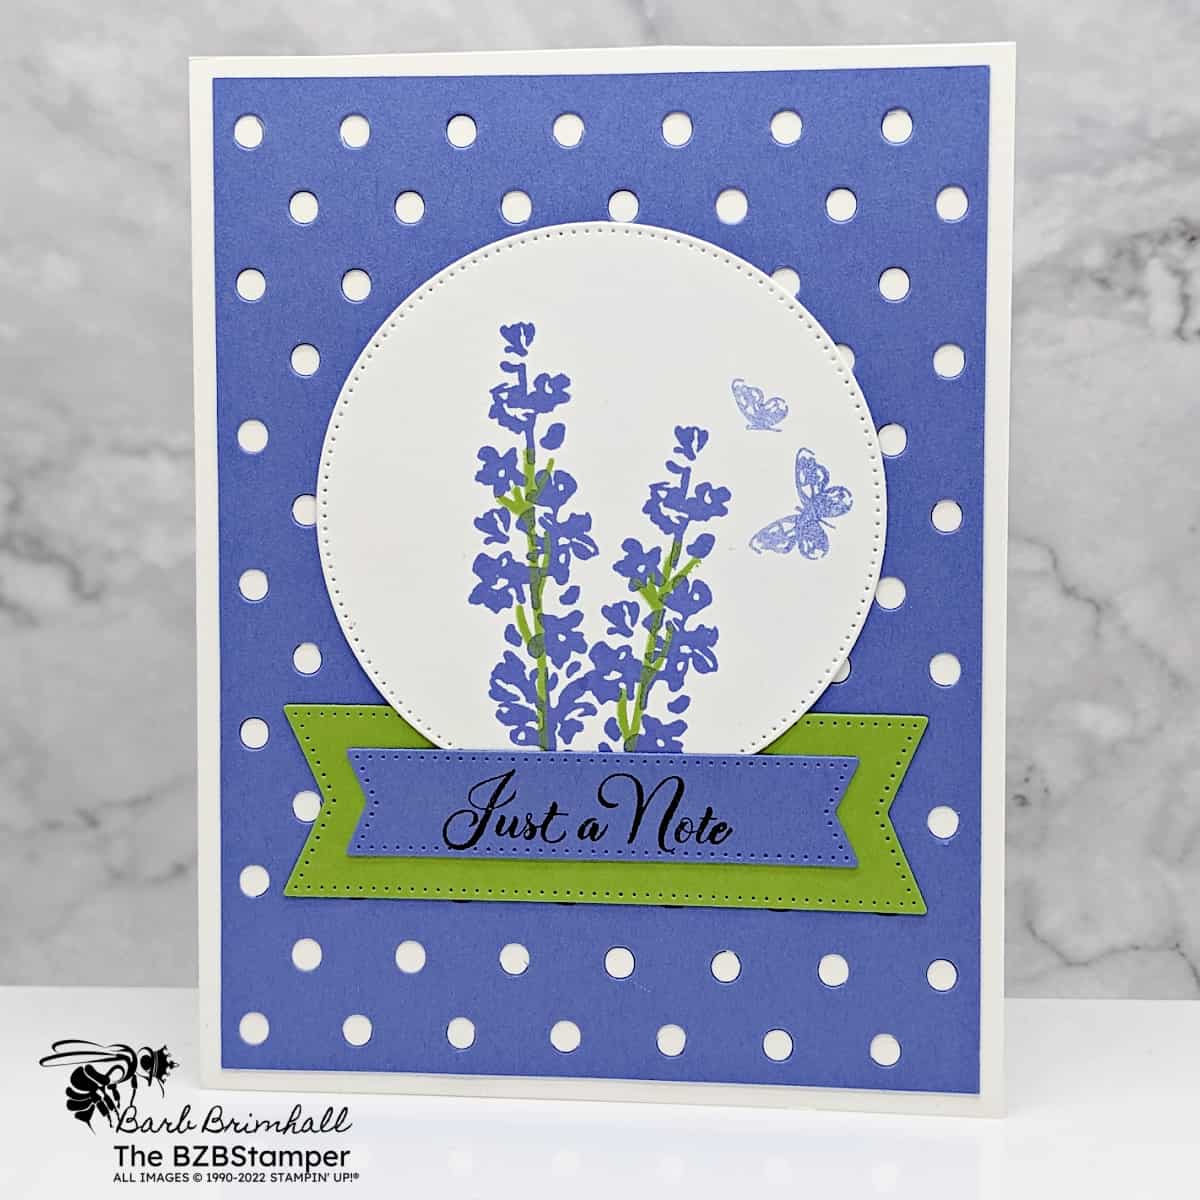 Painted Lavender Stamp Set by Stampin' Up! in purples and greens with Lavender and a butterfly image and a "just a note" sentiment.